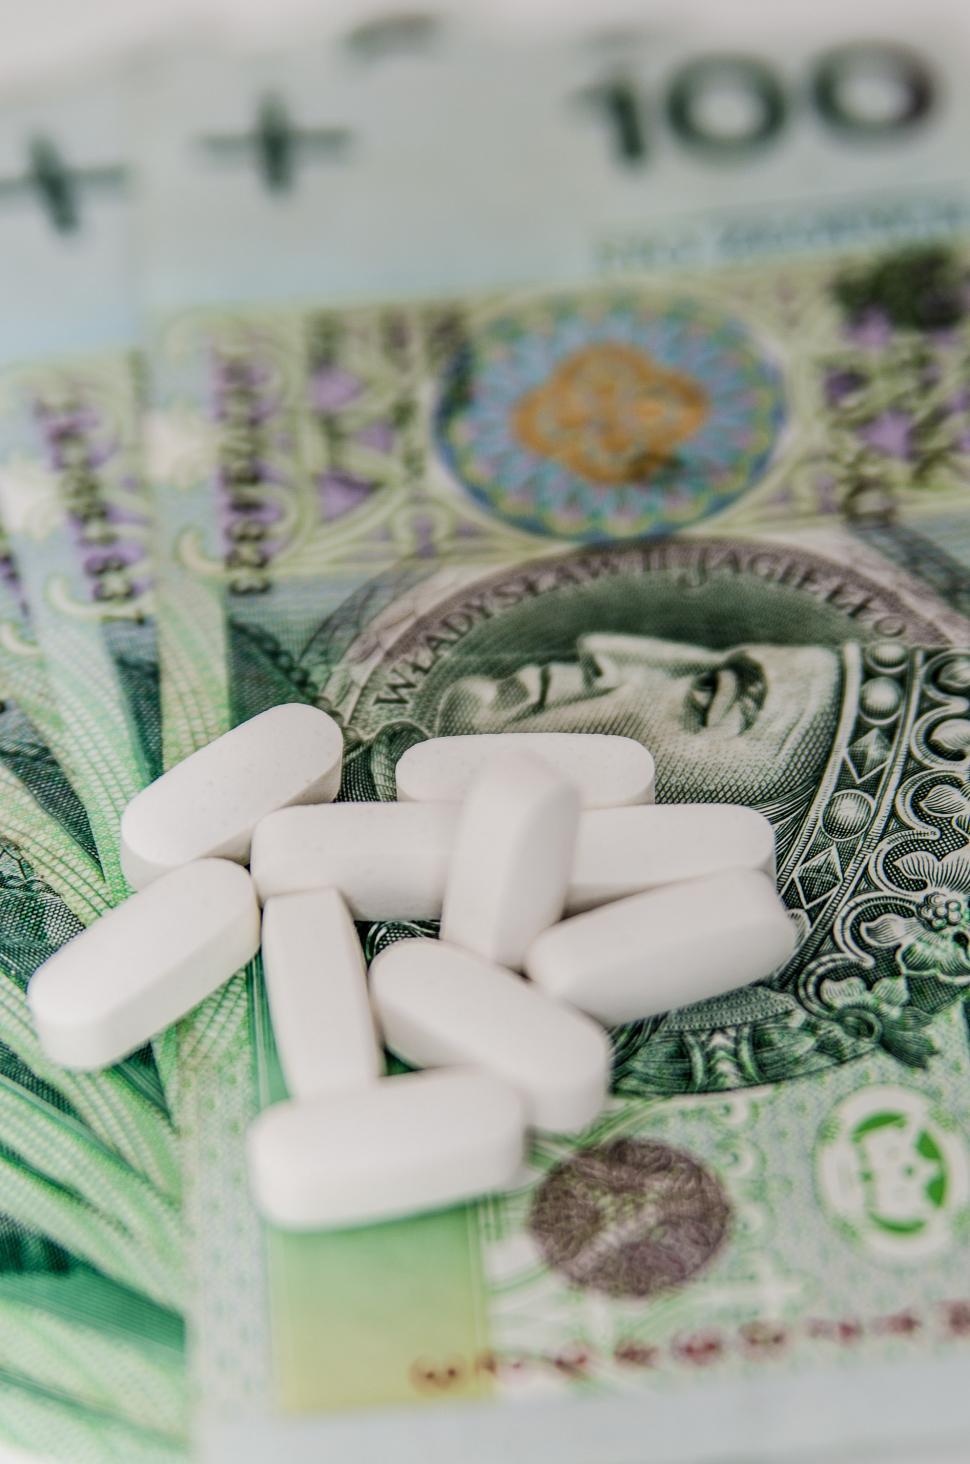 Free Image of Pills Stacked on Money 